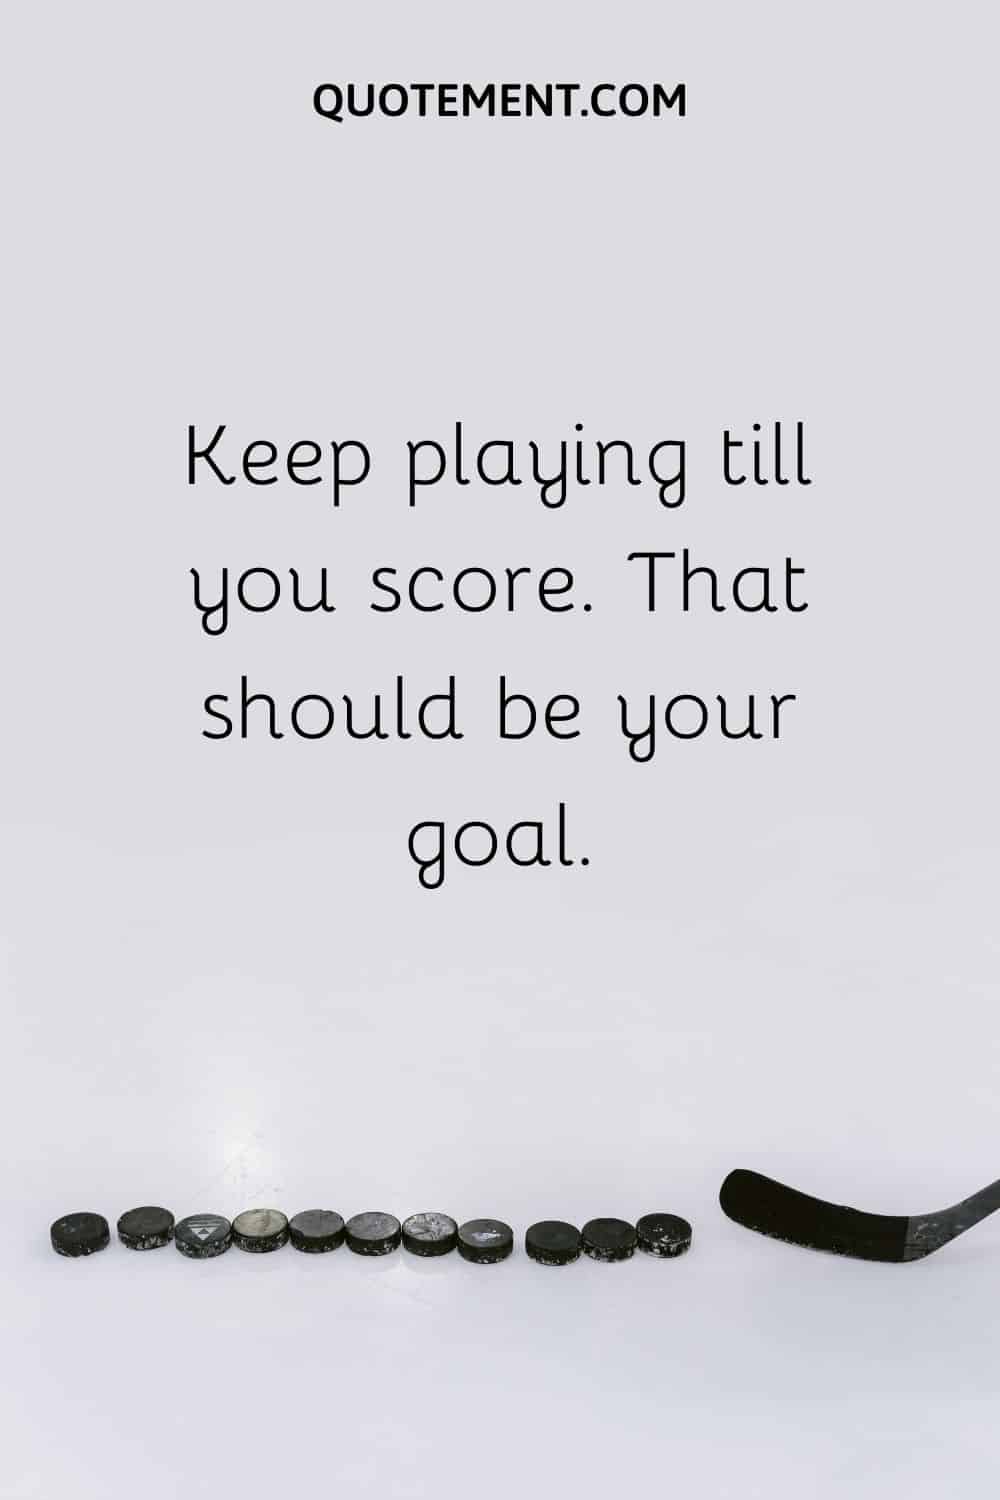 Keep playing till you score. That should be your goal.